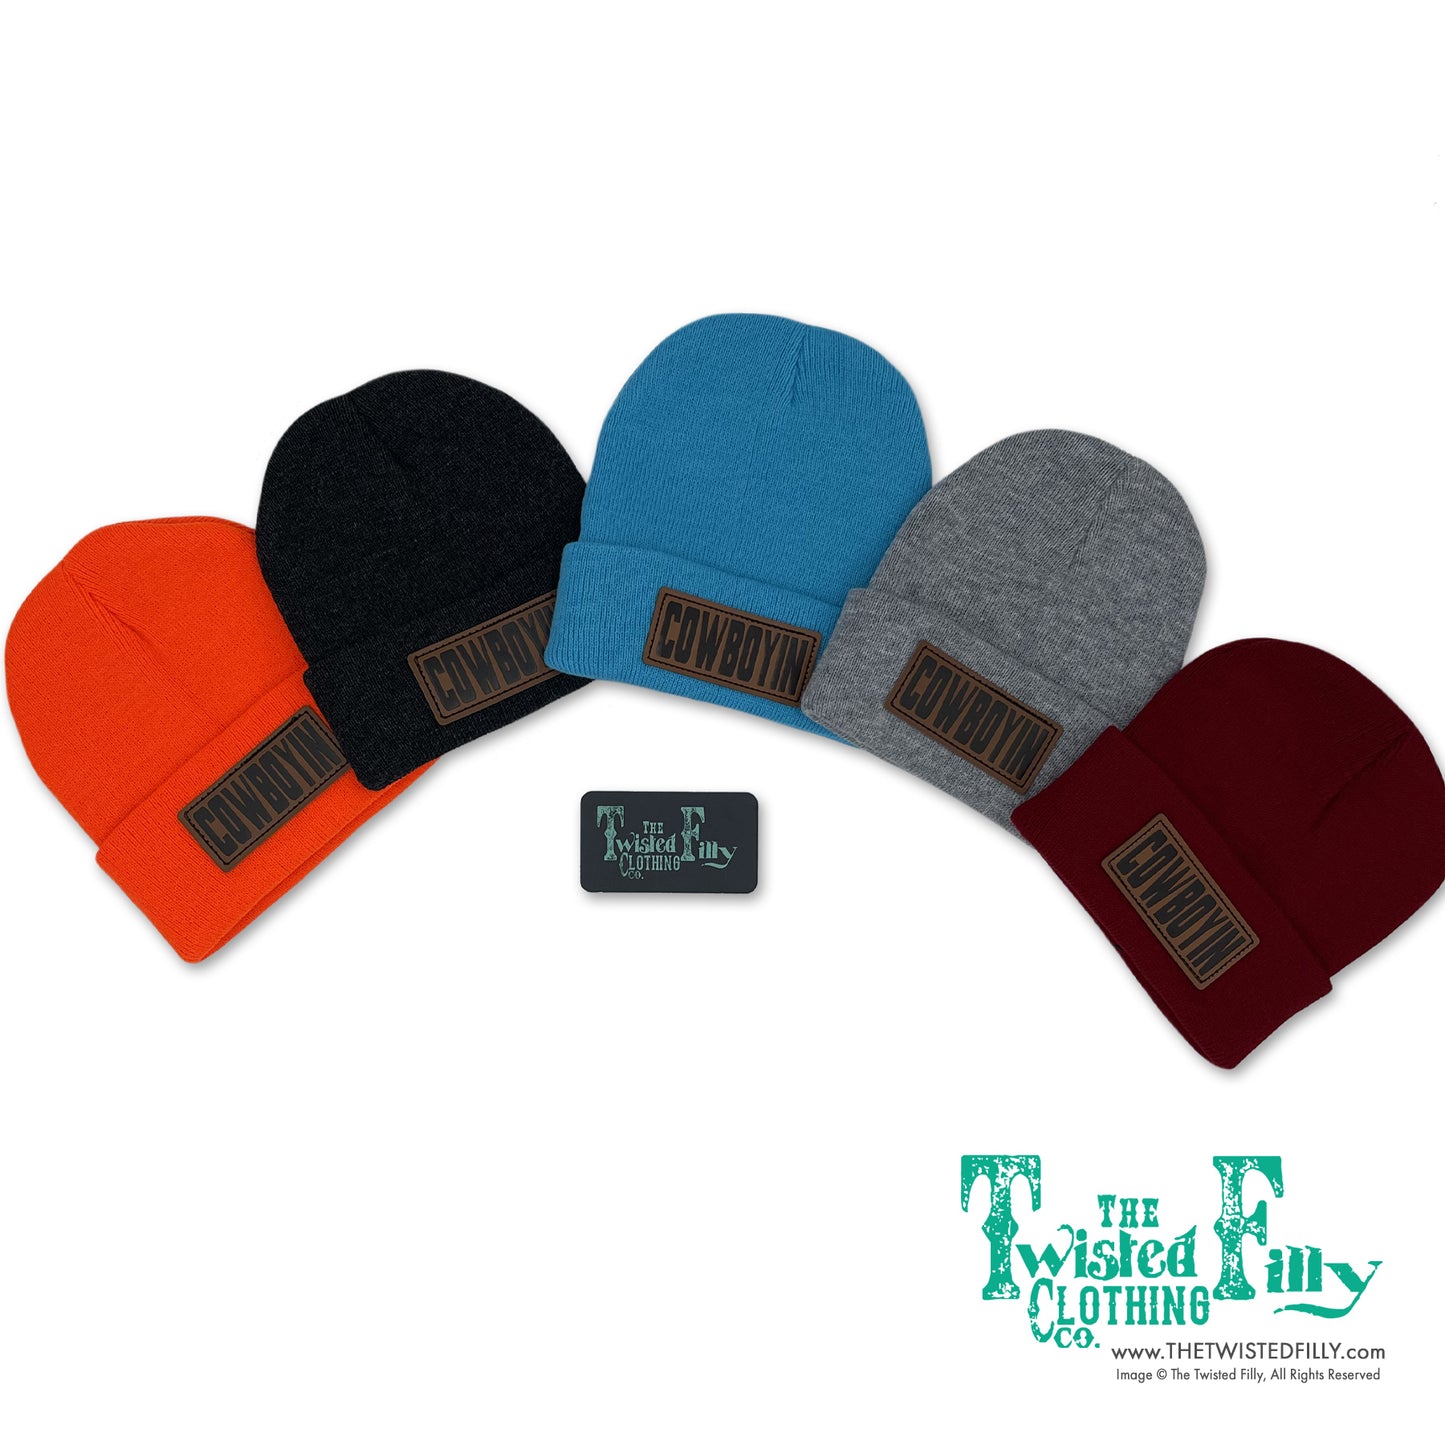 Cowboyin' Leather Patch Beanie - Turquoise